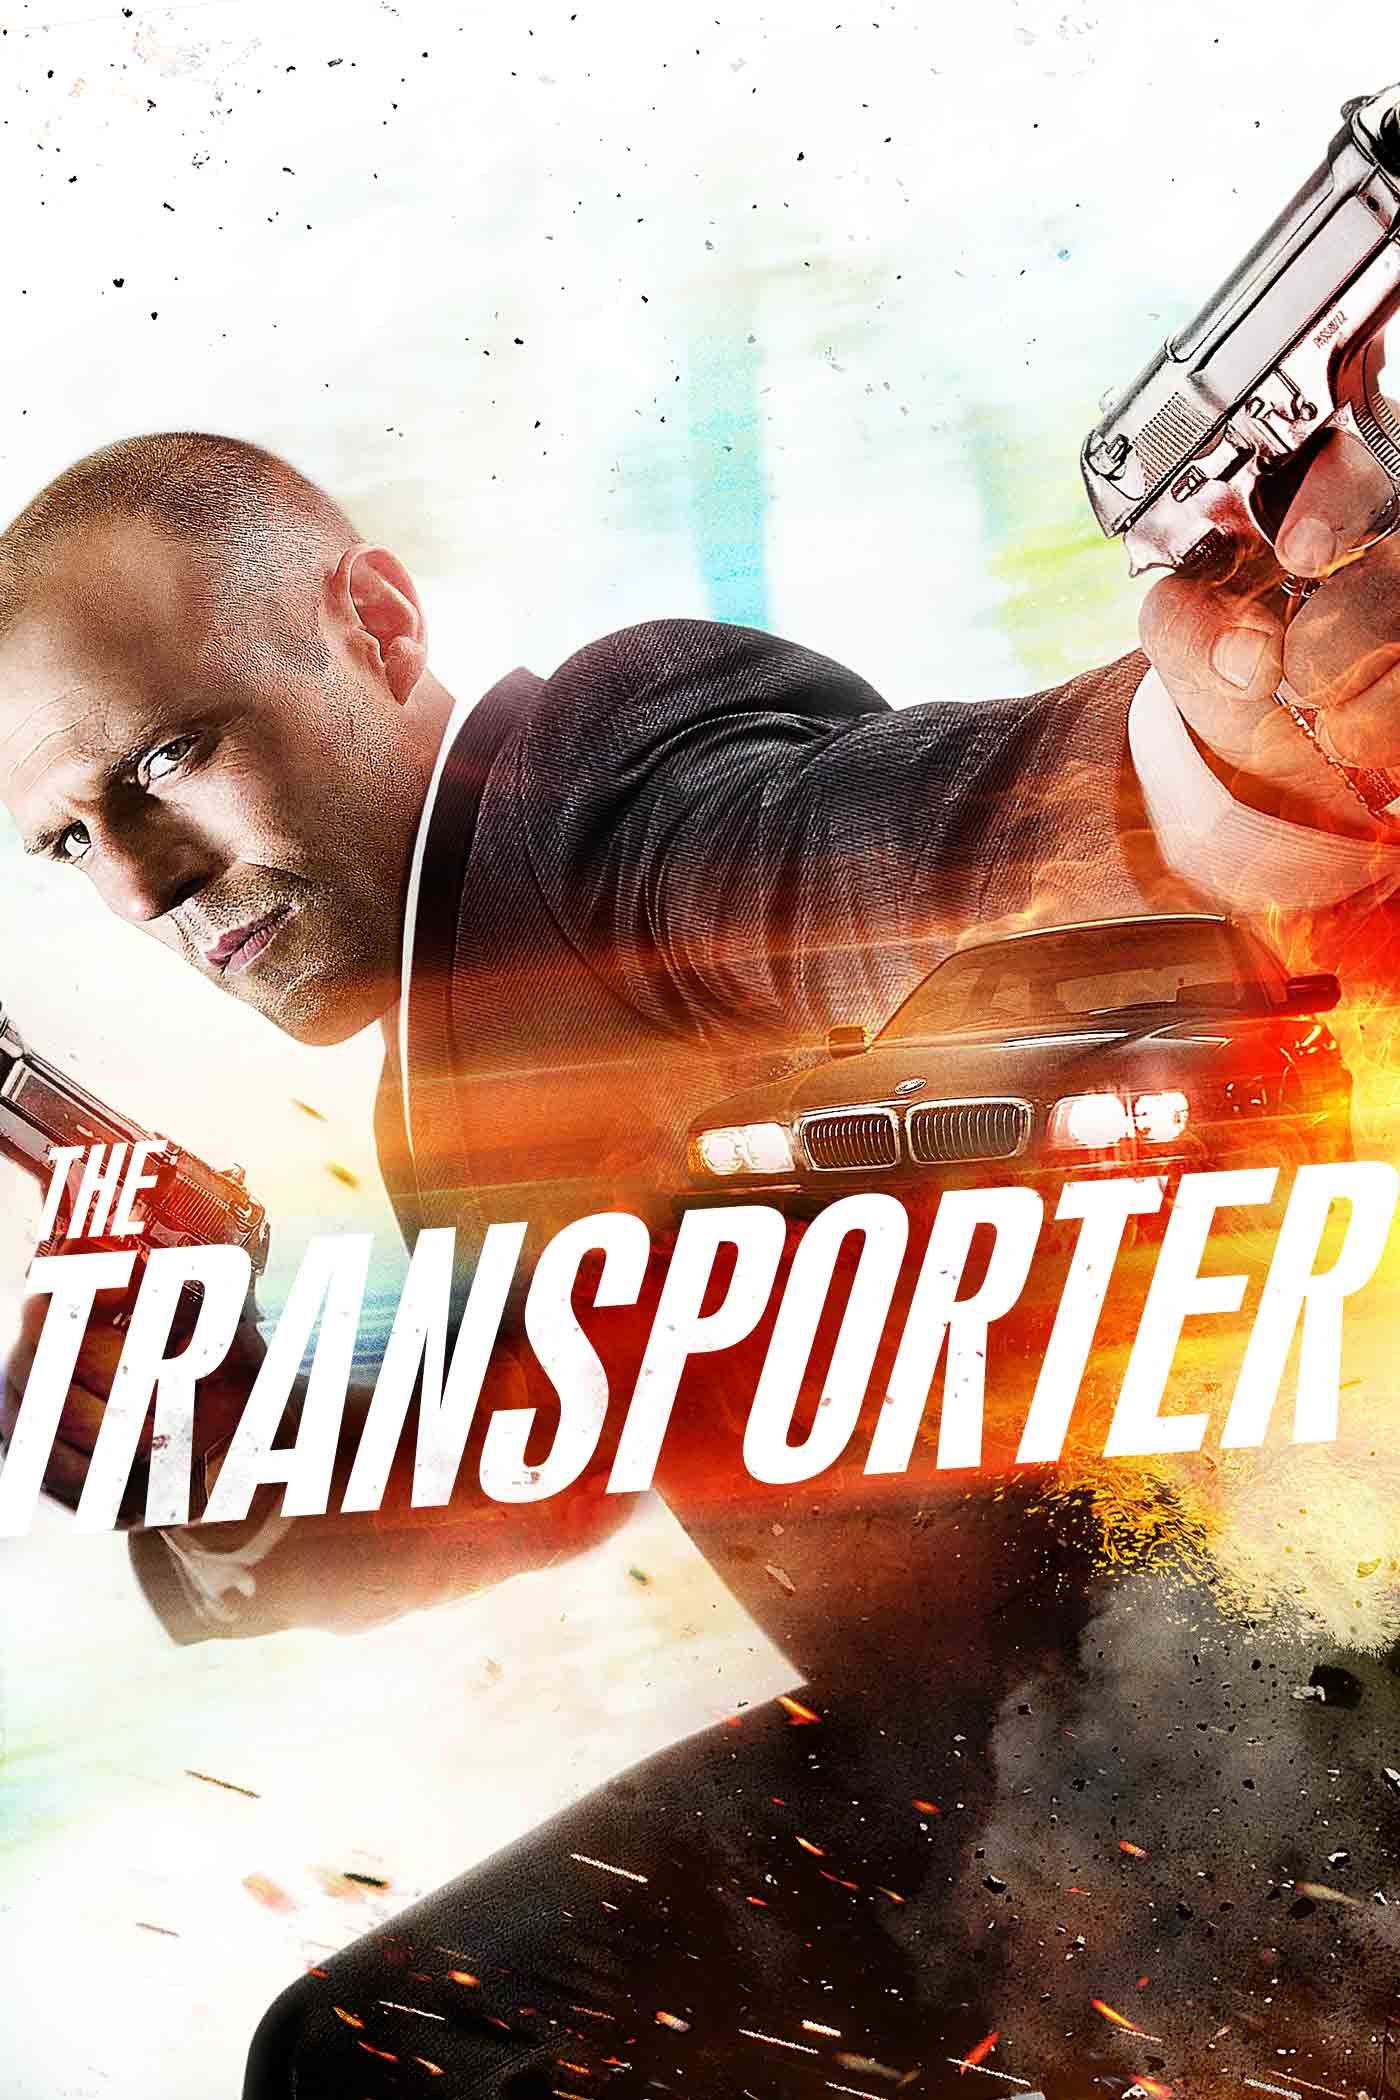 The Transporter | Full Movie | Movies Anywhere